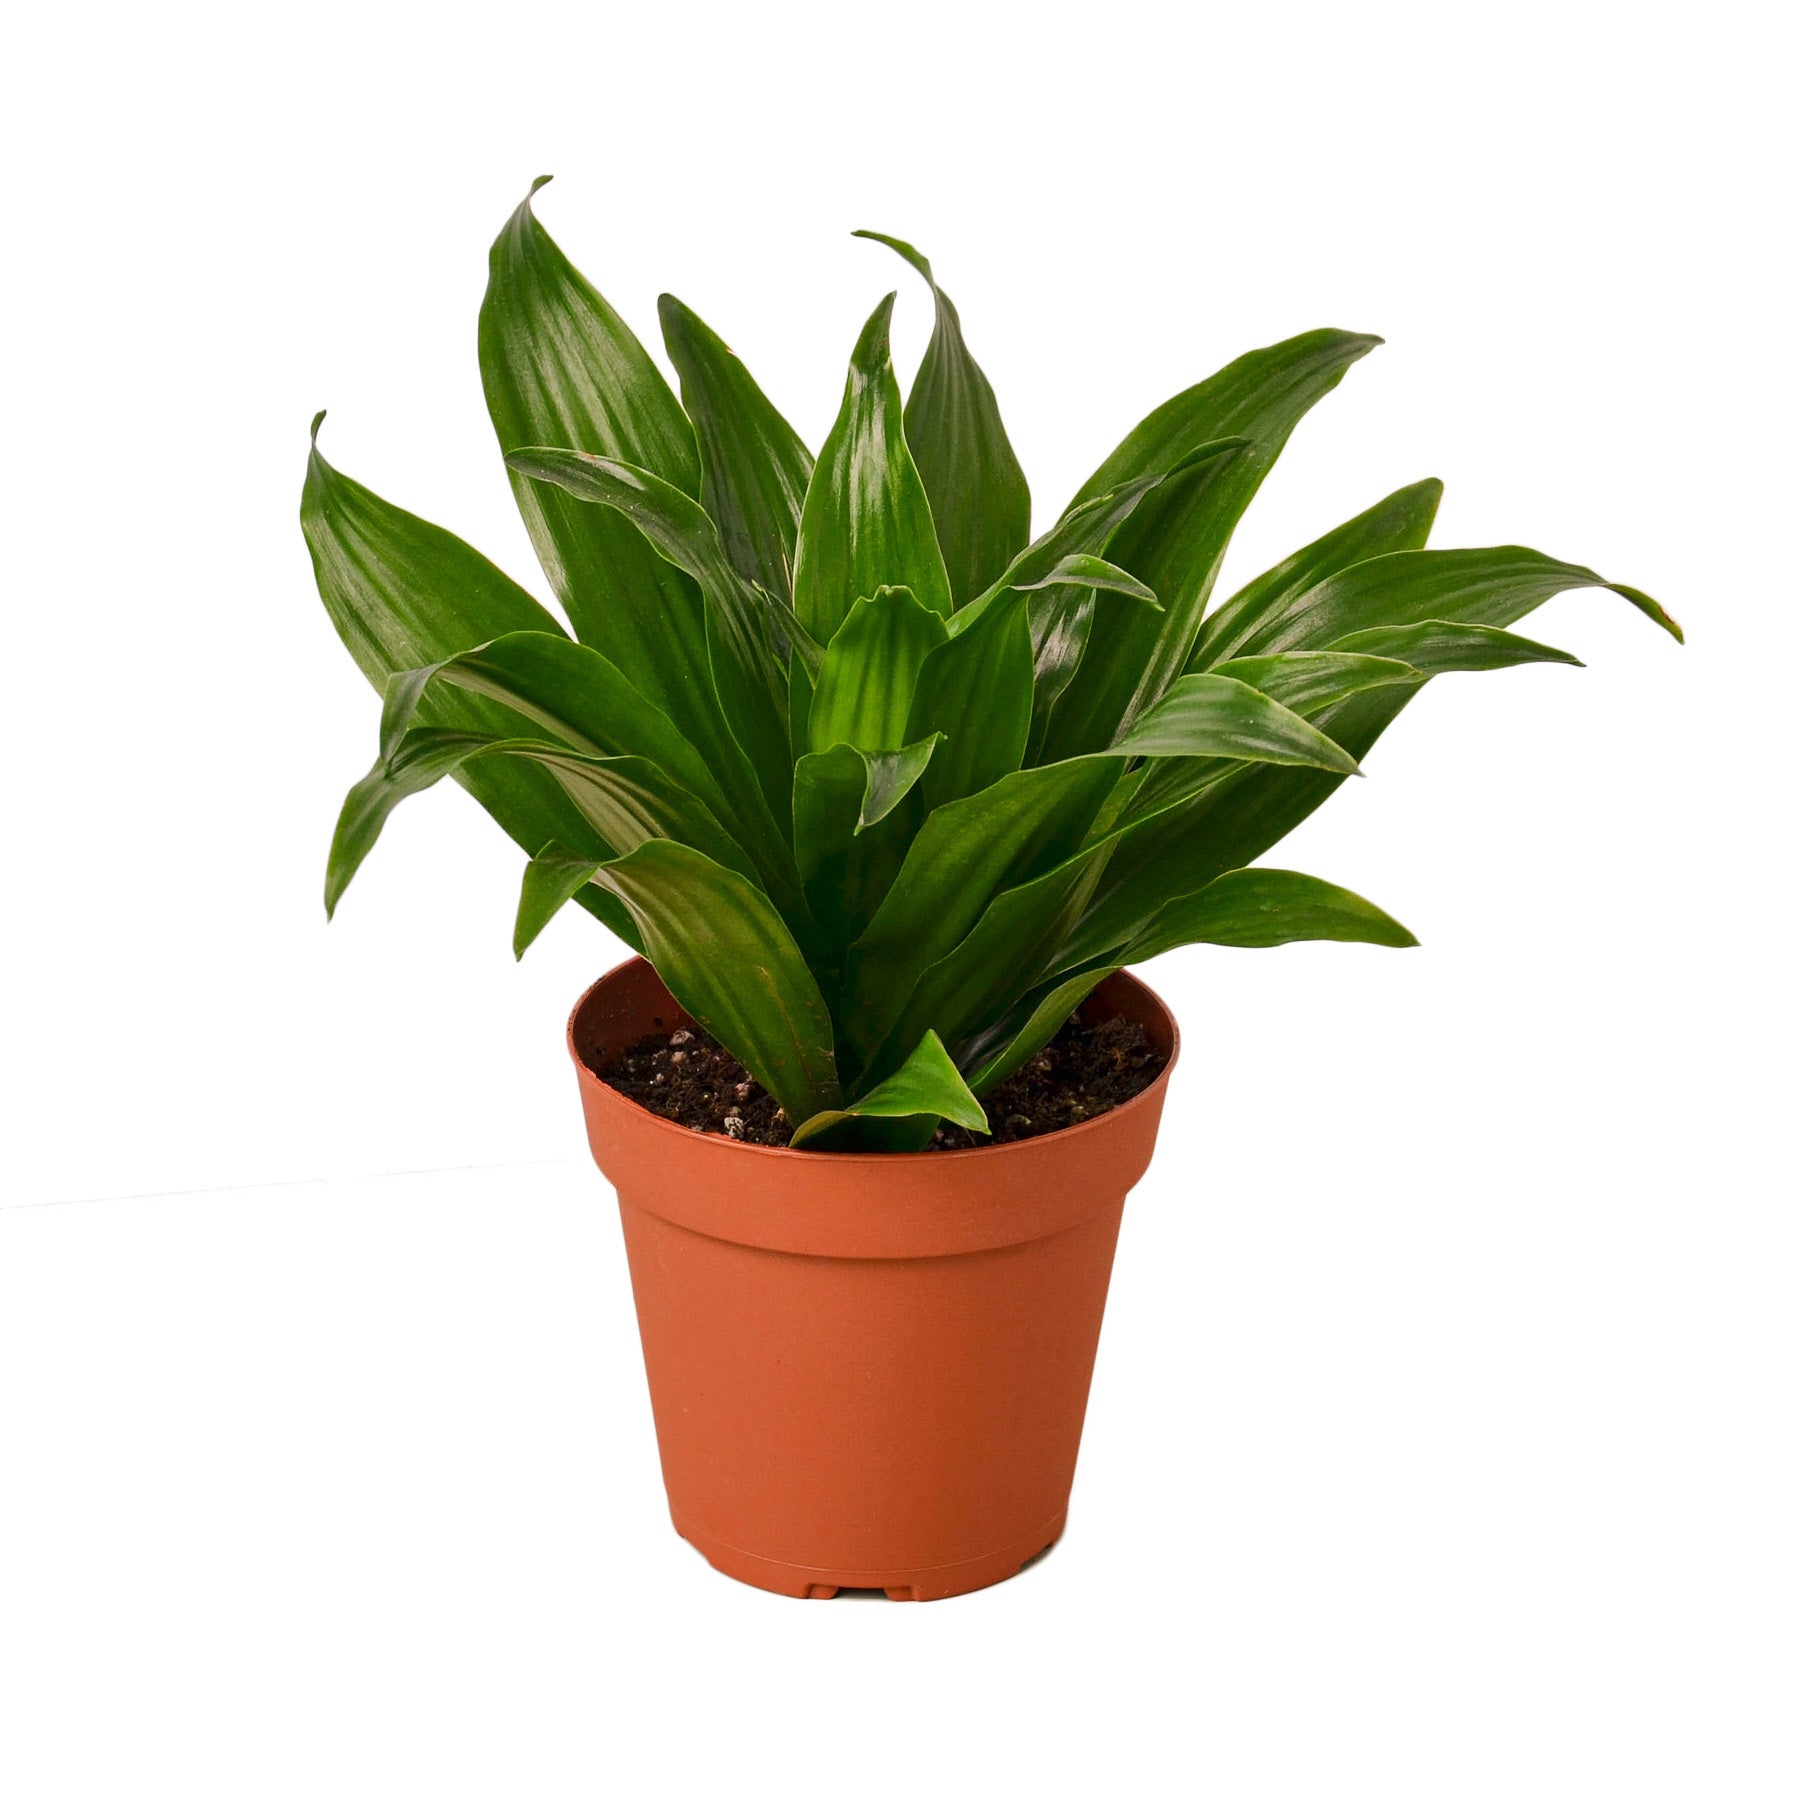 A potted plant on a white background, showcasing the beauty of nature.